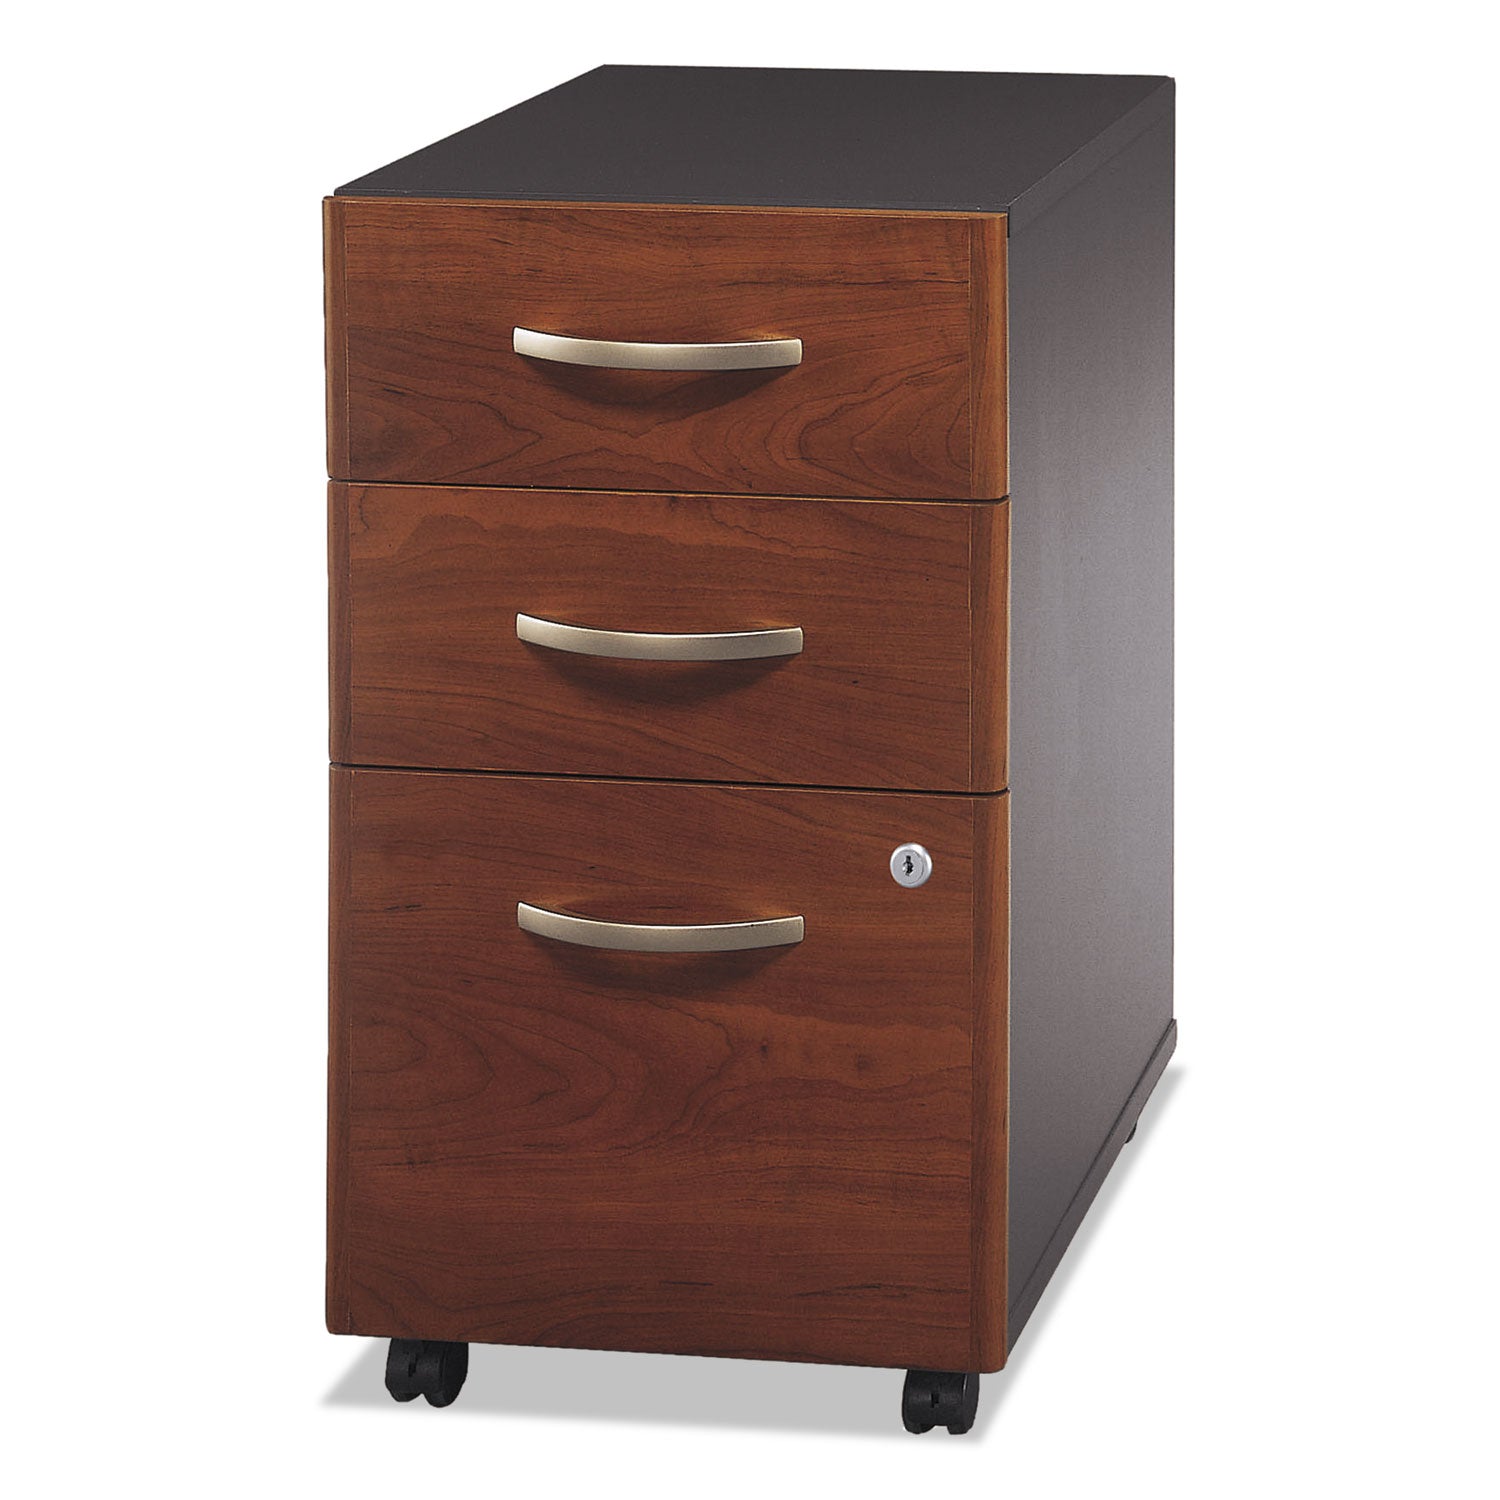 Series C Mobile Pedestal File, Left/Right, 3-Drawers: Box/Box/File, Legal/Letter/A4/A5, Cherry/Gray, 15.75" x 20.25" x 27.88 - 